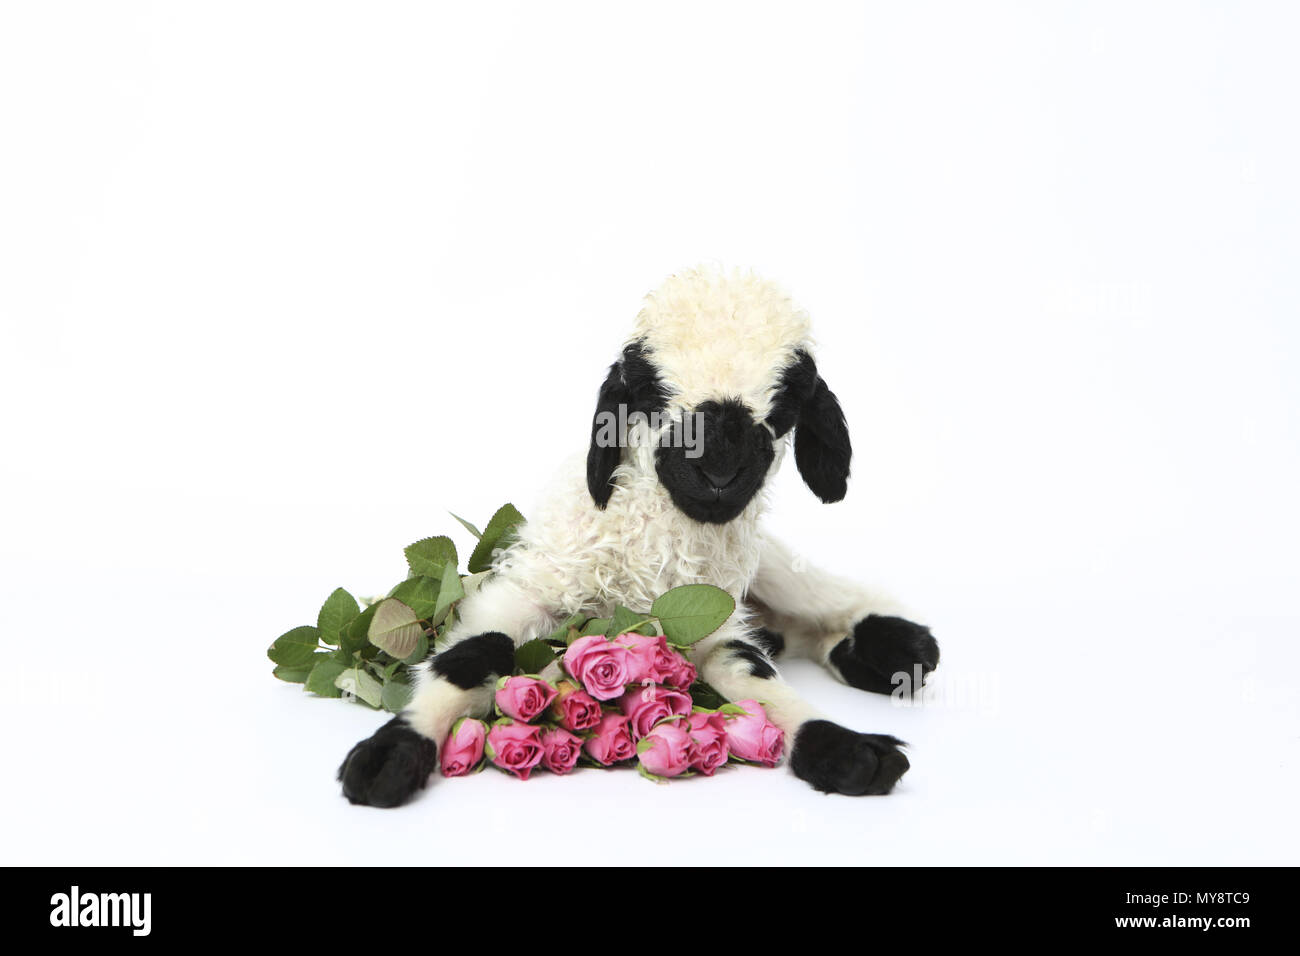 Valais Blacknose Sheep. Lamb (6 days old) lying next to a pink rose bouquet. Studio picture against a pink background. Germany Stock Photo